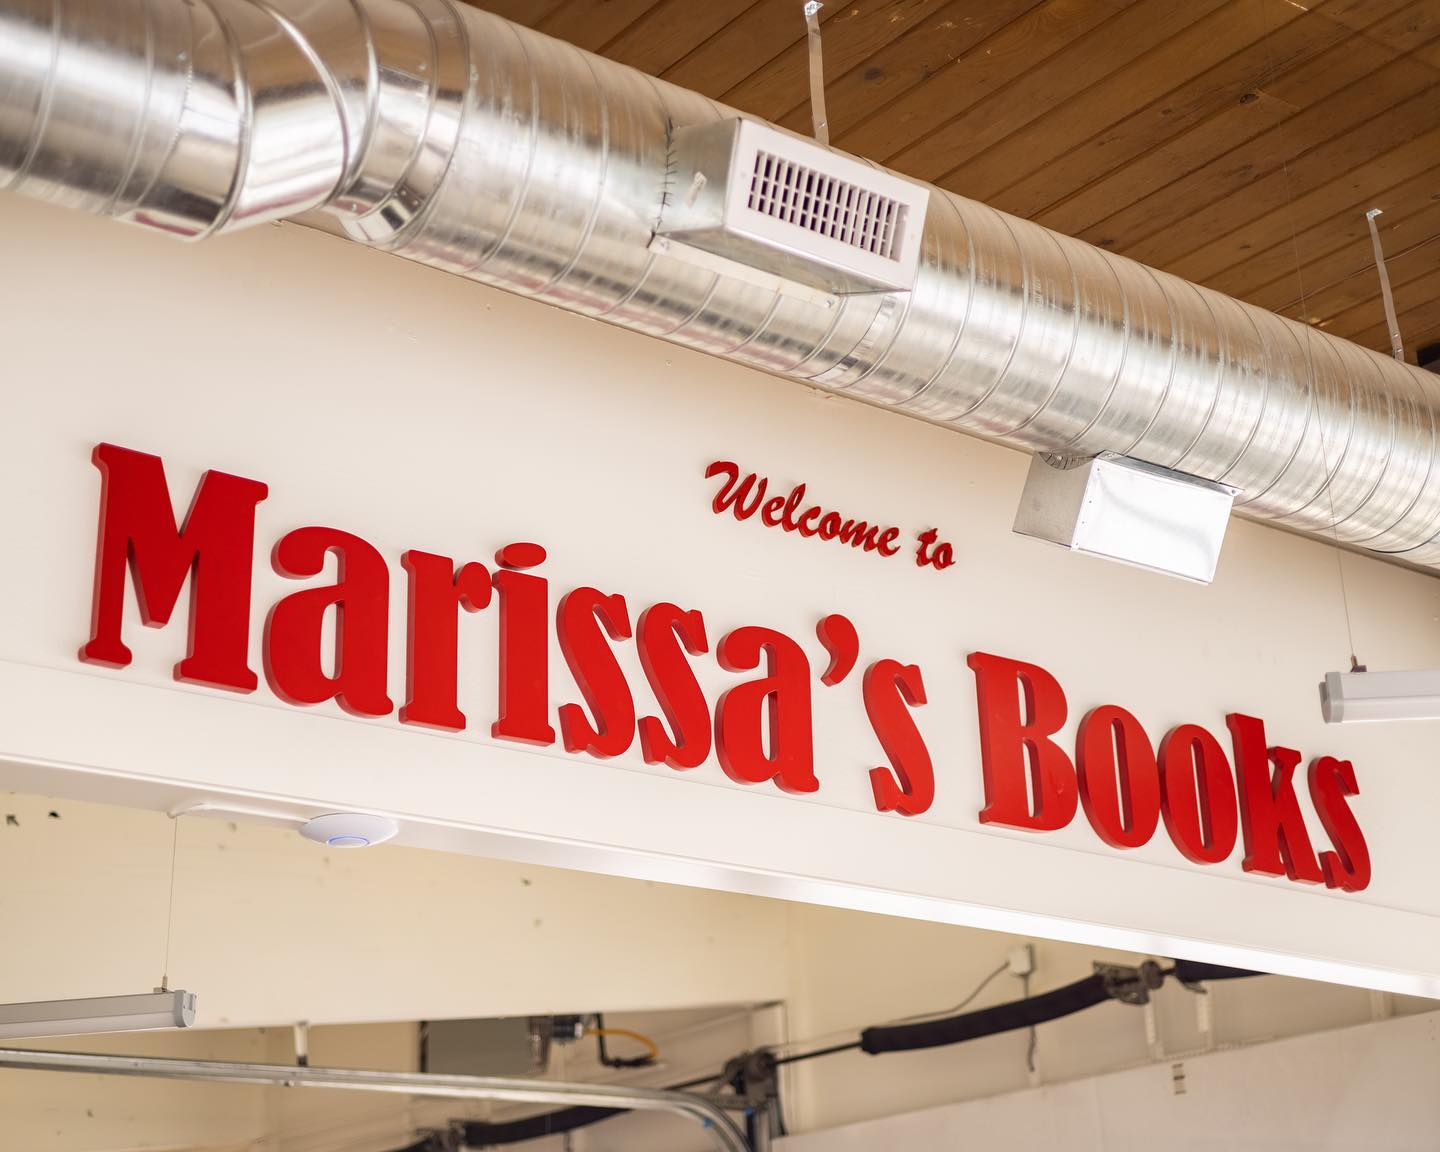 Logo that says "Welcome to Marissa's Books"